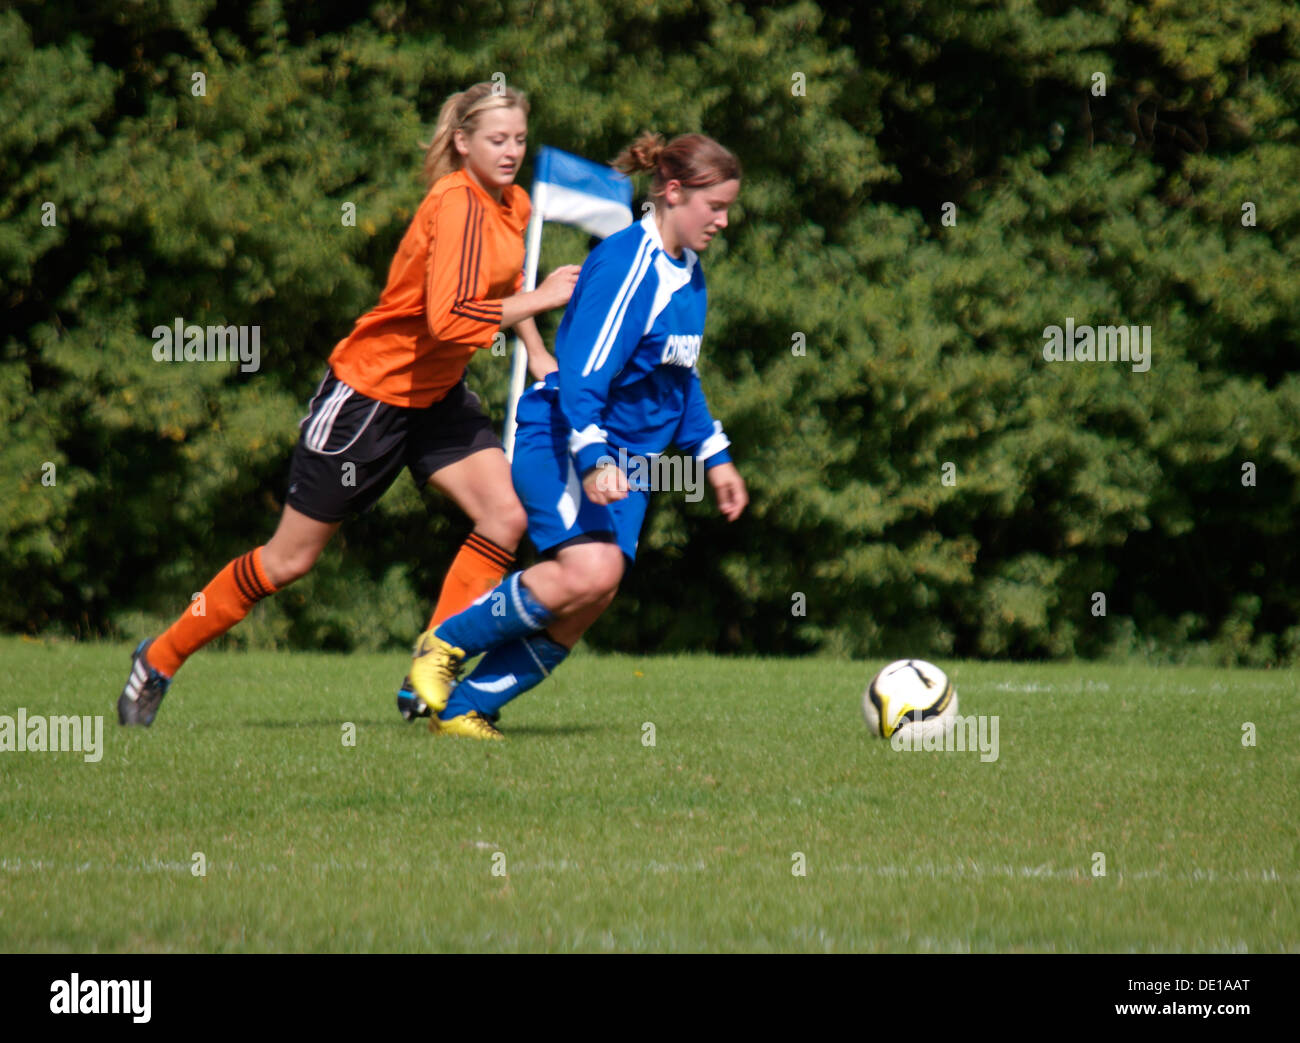 Action during women's football match, Bude, Cornwall, UK 2013 Stock Photo